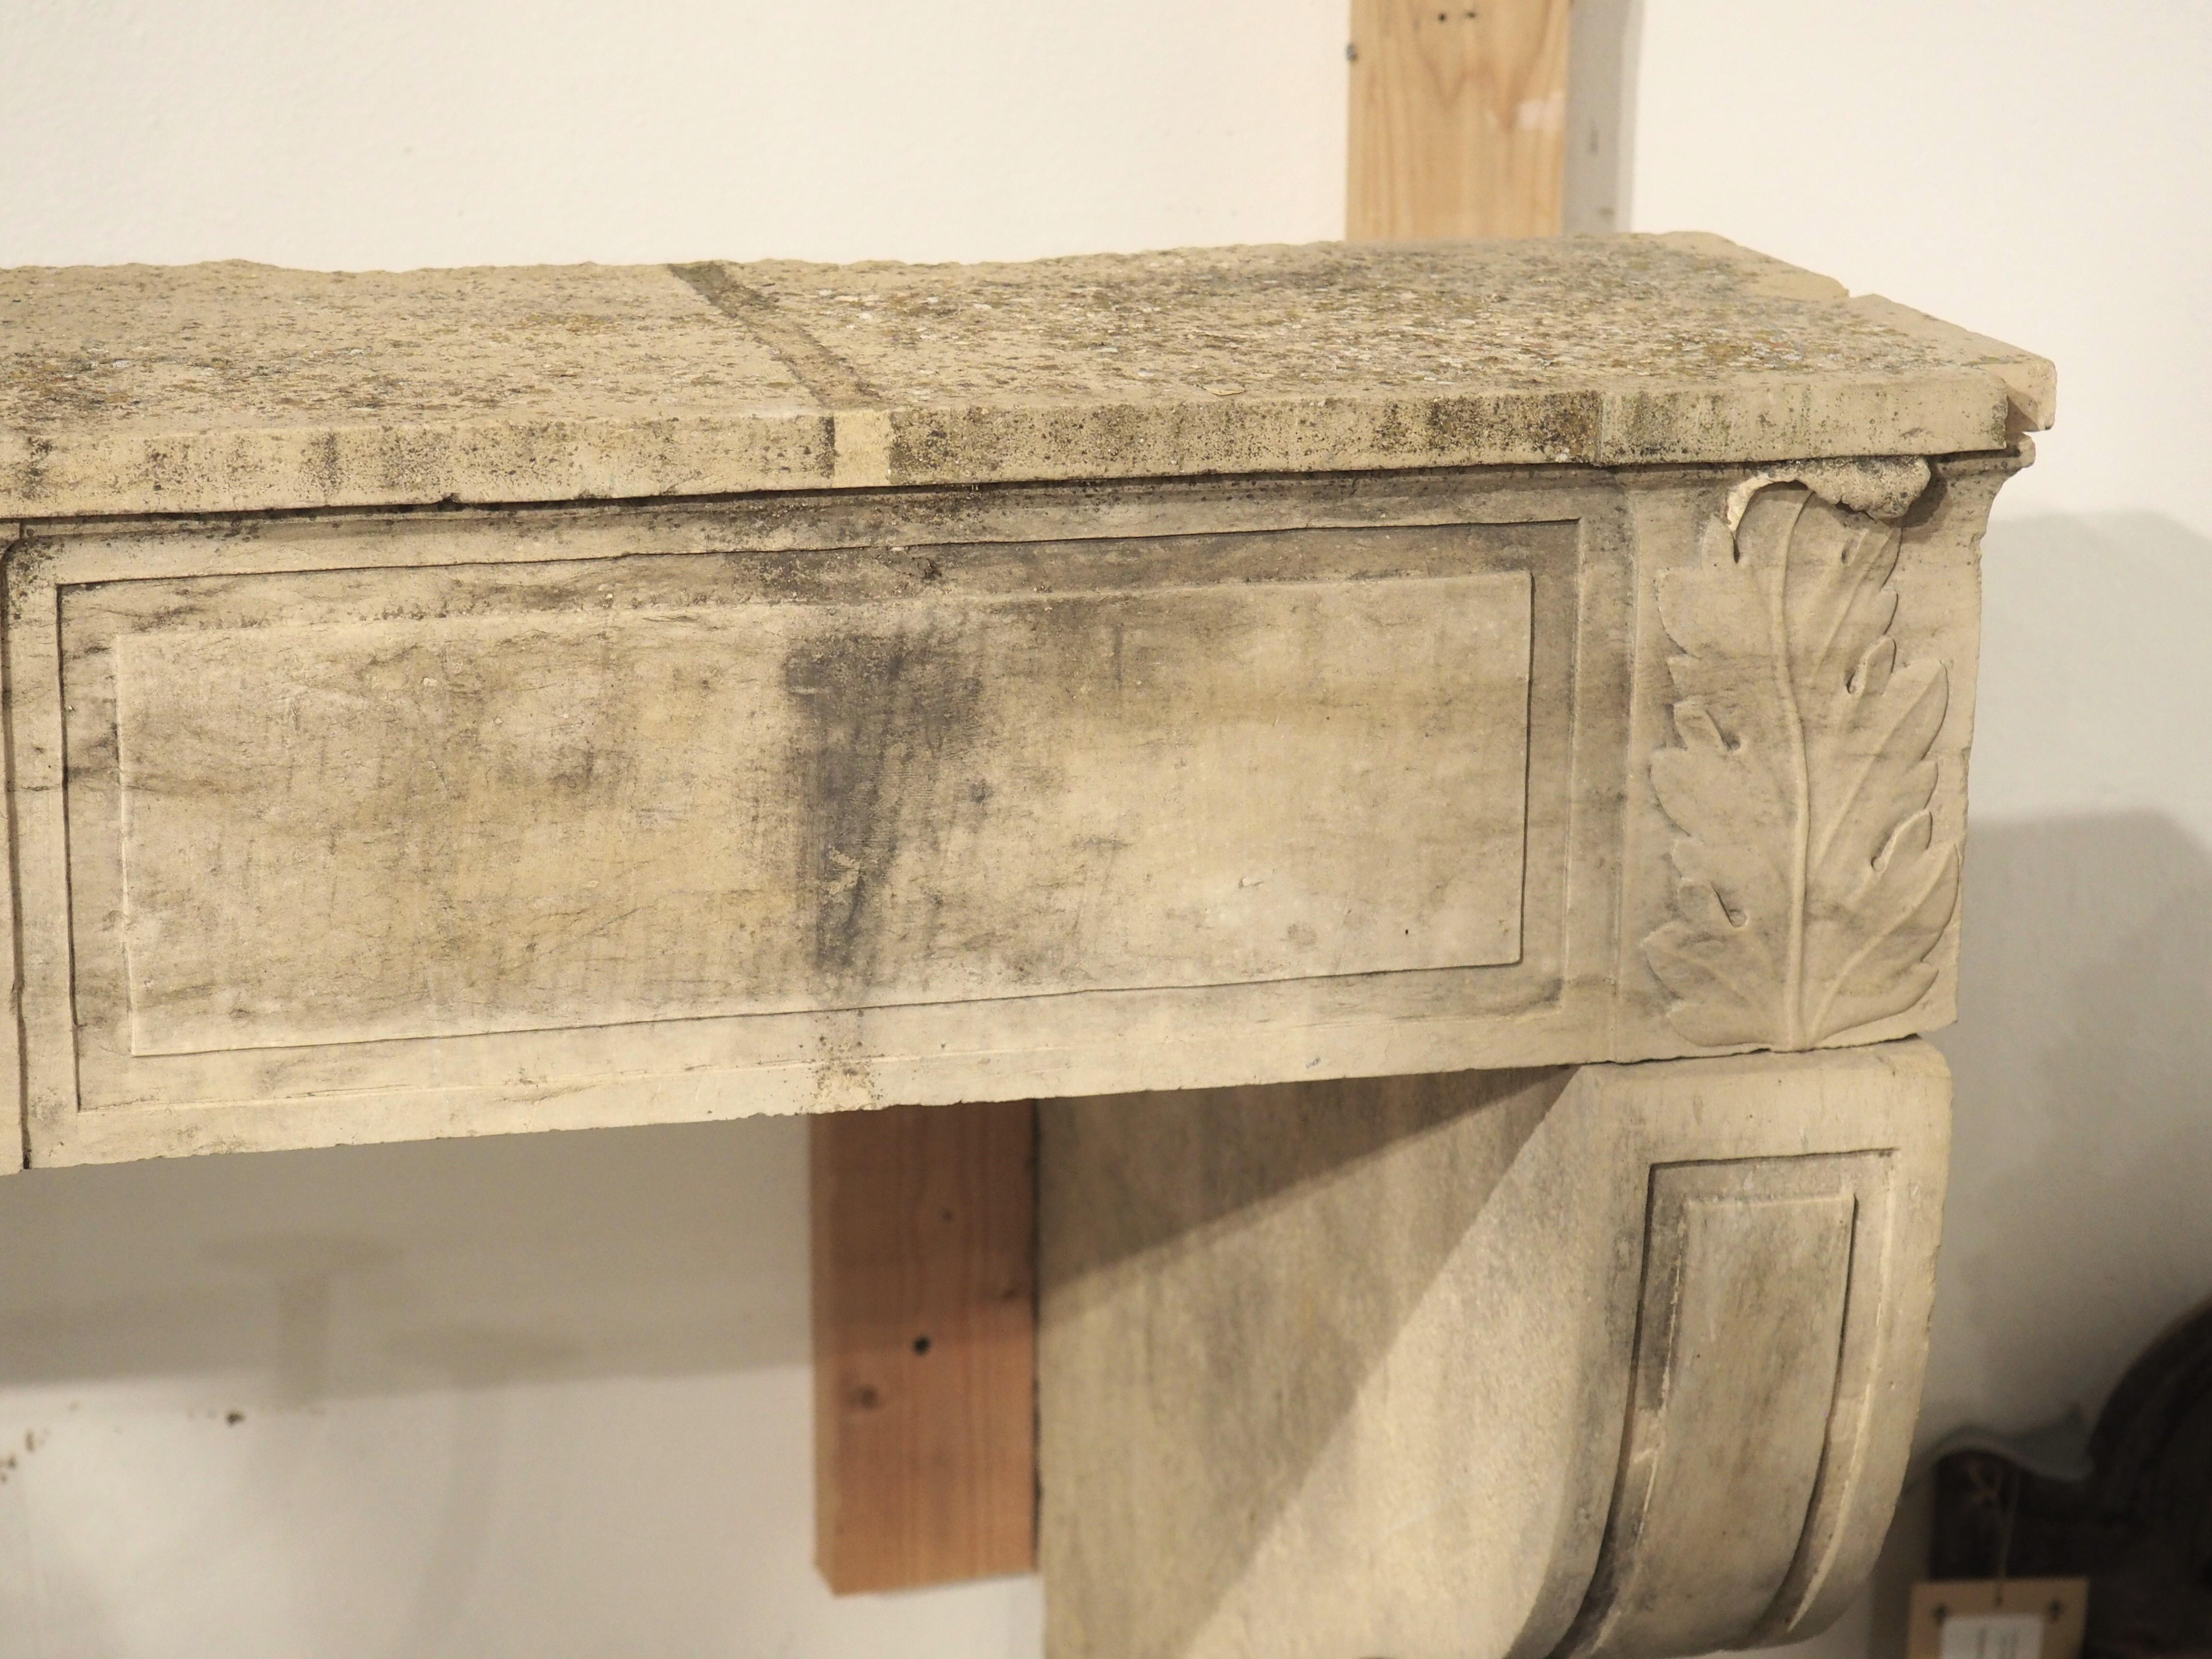 Hand-carved in five sections, this limestone fireplace mantel hails from the commune of Beaune, in eastern France. Dating to about 1785, the carvings are definitively period Louis XVI, most noticeably the center trophy medallion and the sinuous,